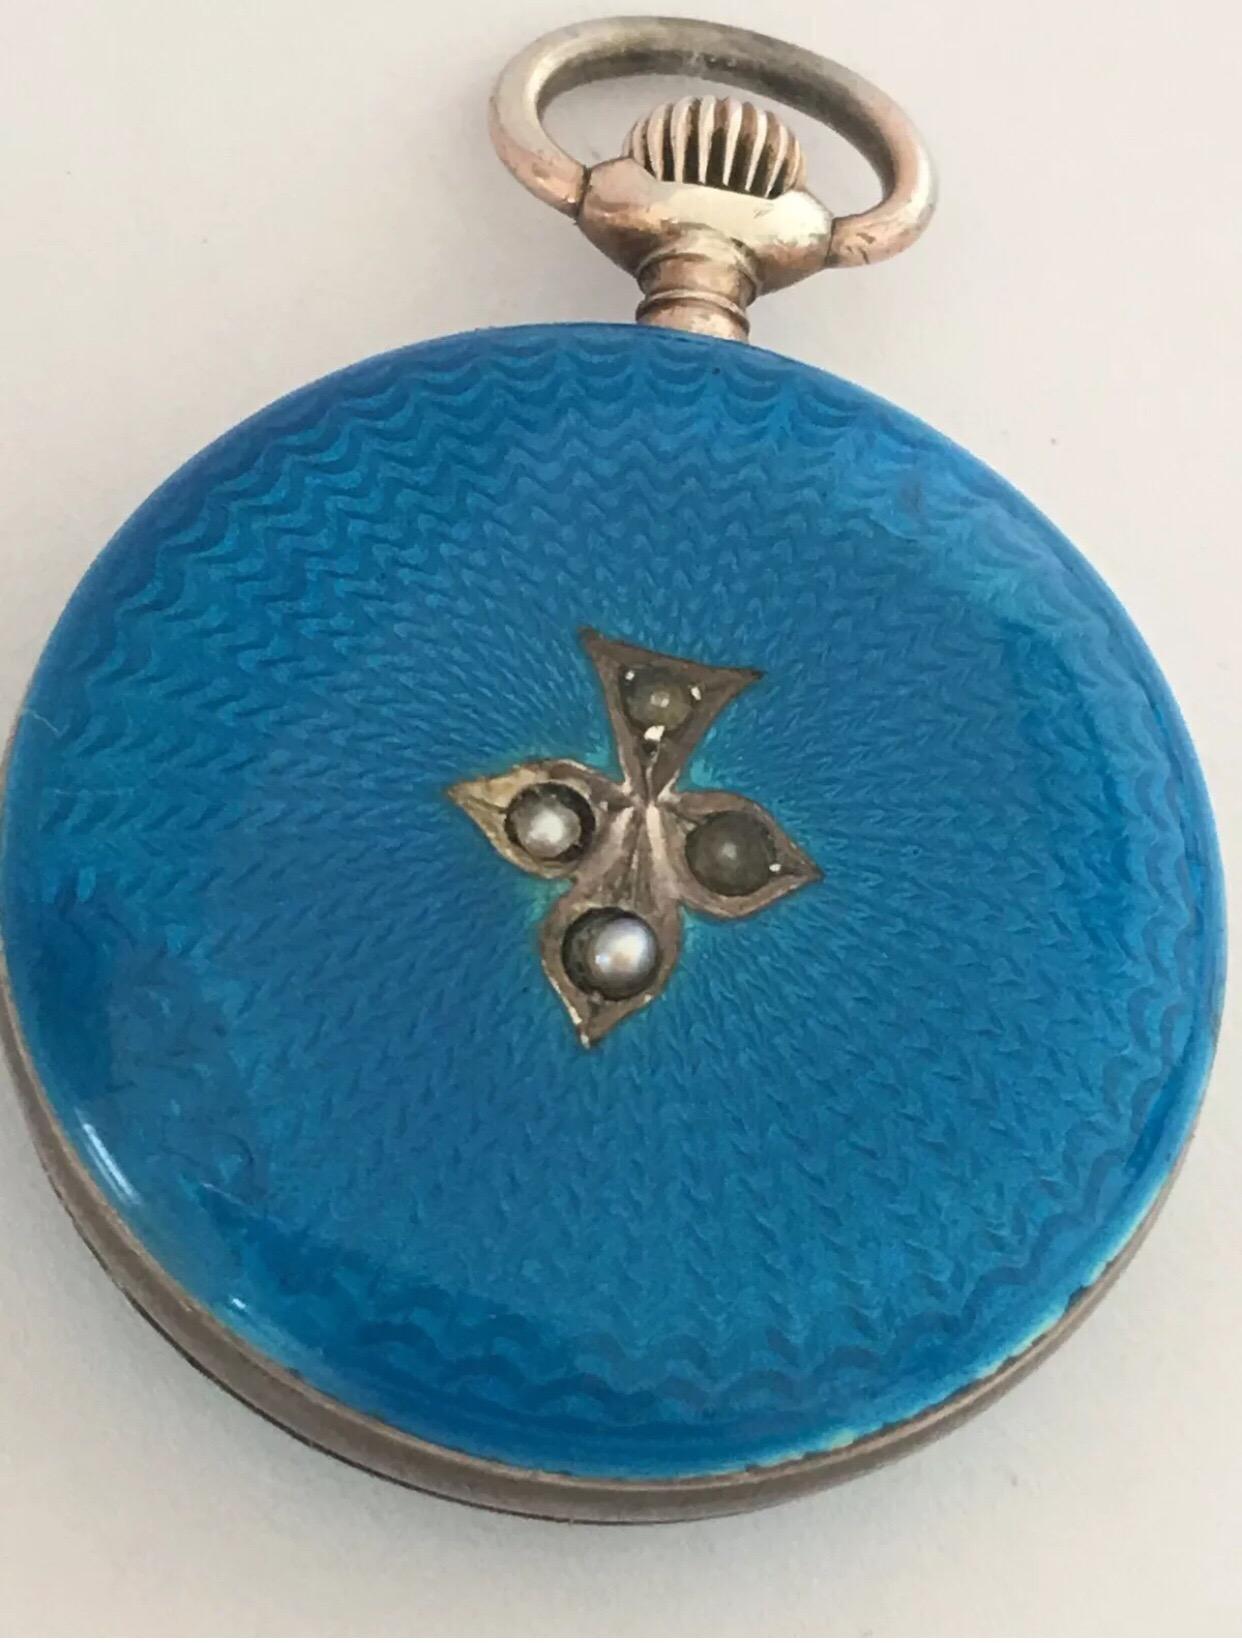 Antique Turquoise / Blue Enamel Fob Watch .


This small fob / pocket watch is working and ticking well. The back case cover has a different shade of blue compared to the front cover As shown on the photos